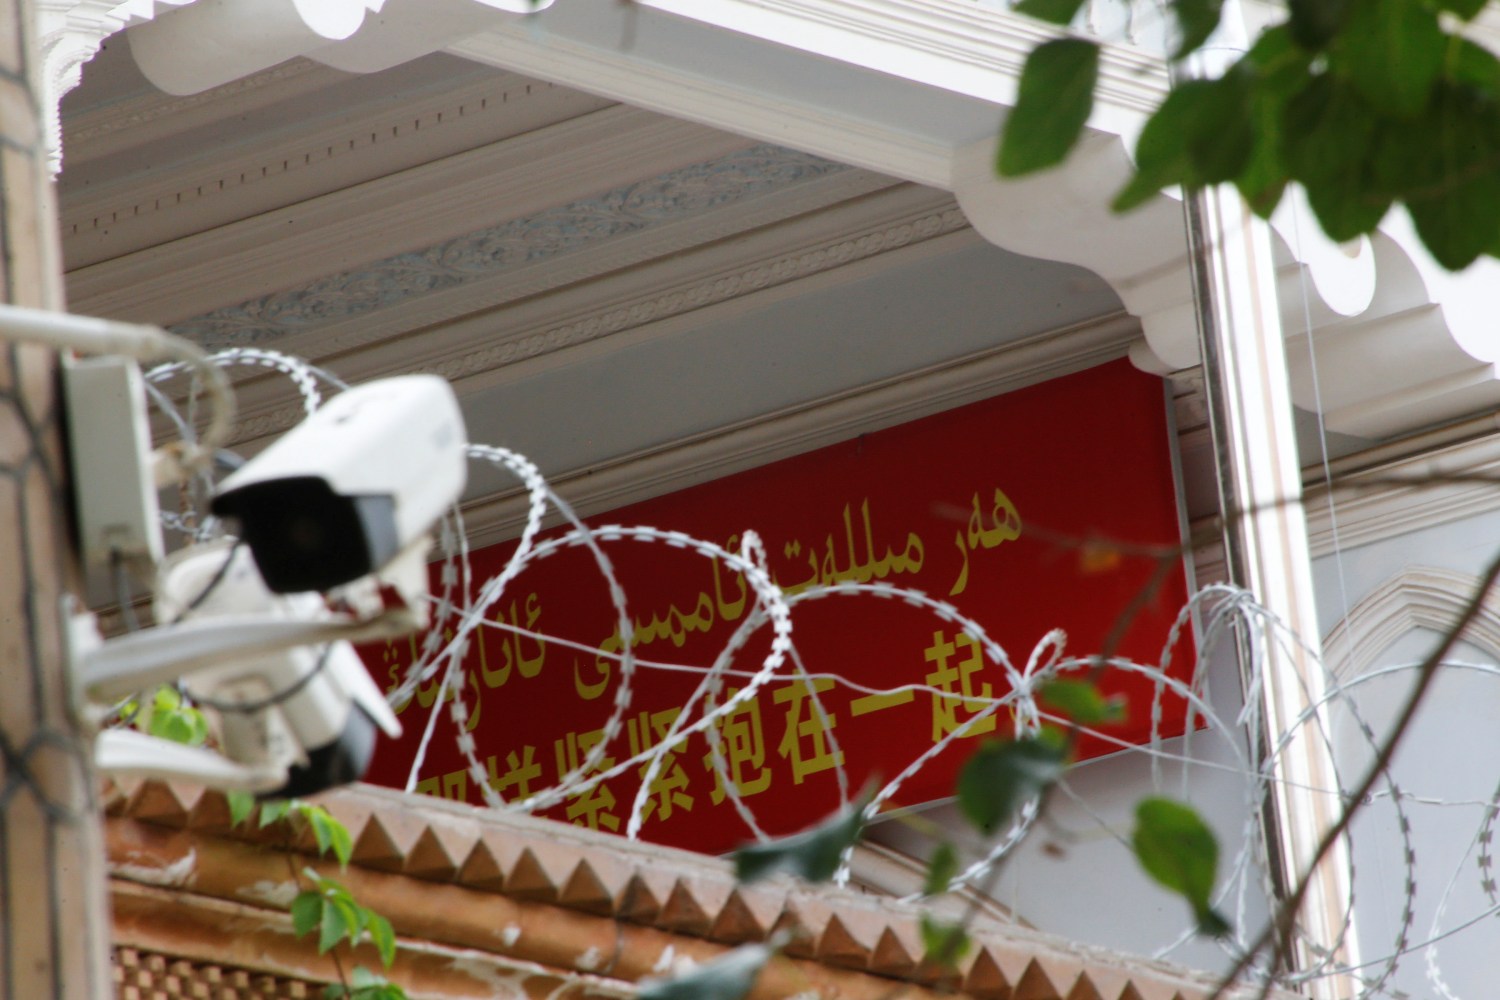 A propaganda banner and a security camera are placed on the walls of a mosque in the Old City in Kashgar, Xinjiang Uighur Autonomous Region, China September 6, 2018. Picture taken September 6, 2018.  To match Special Report MUSLIMS-CAMPS/CHINA  REUTERS/Thomas Peter